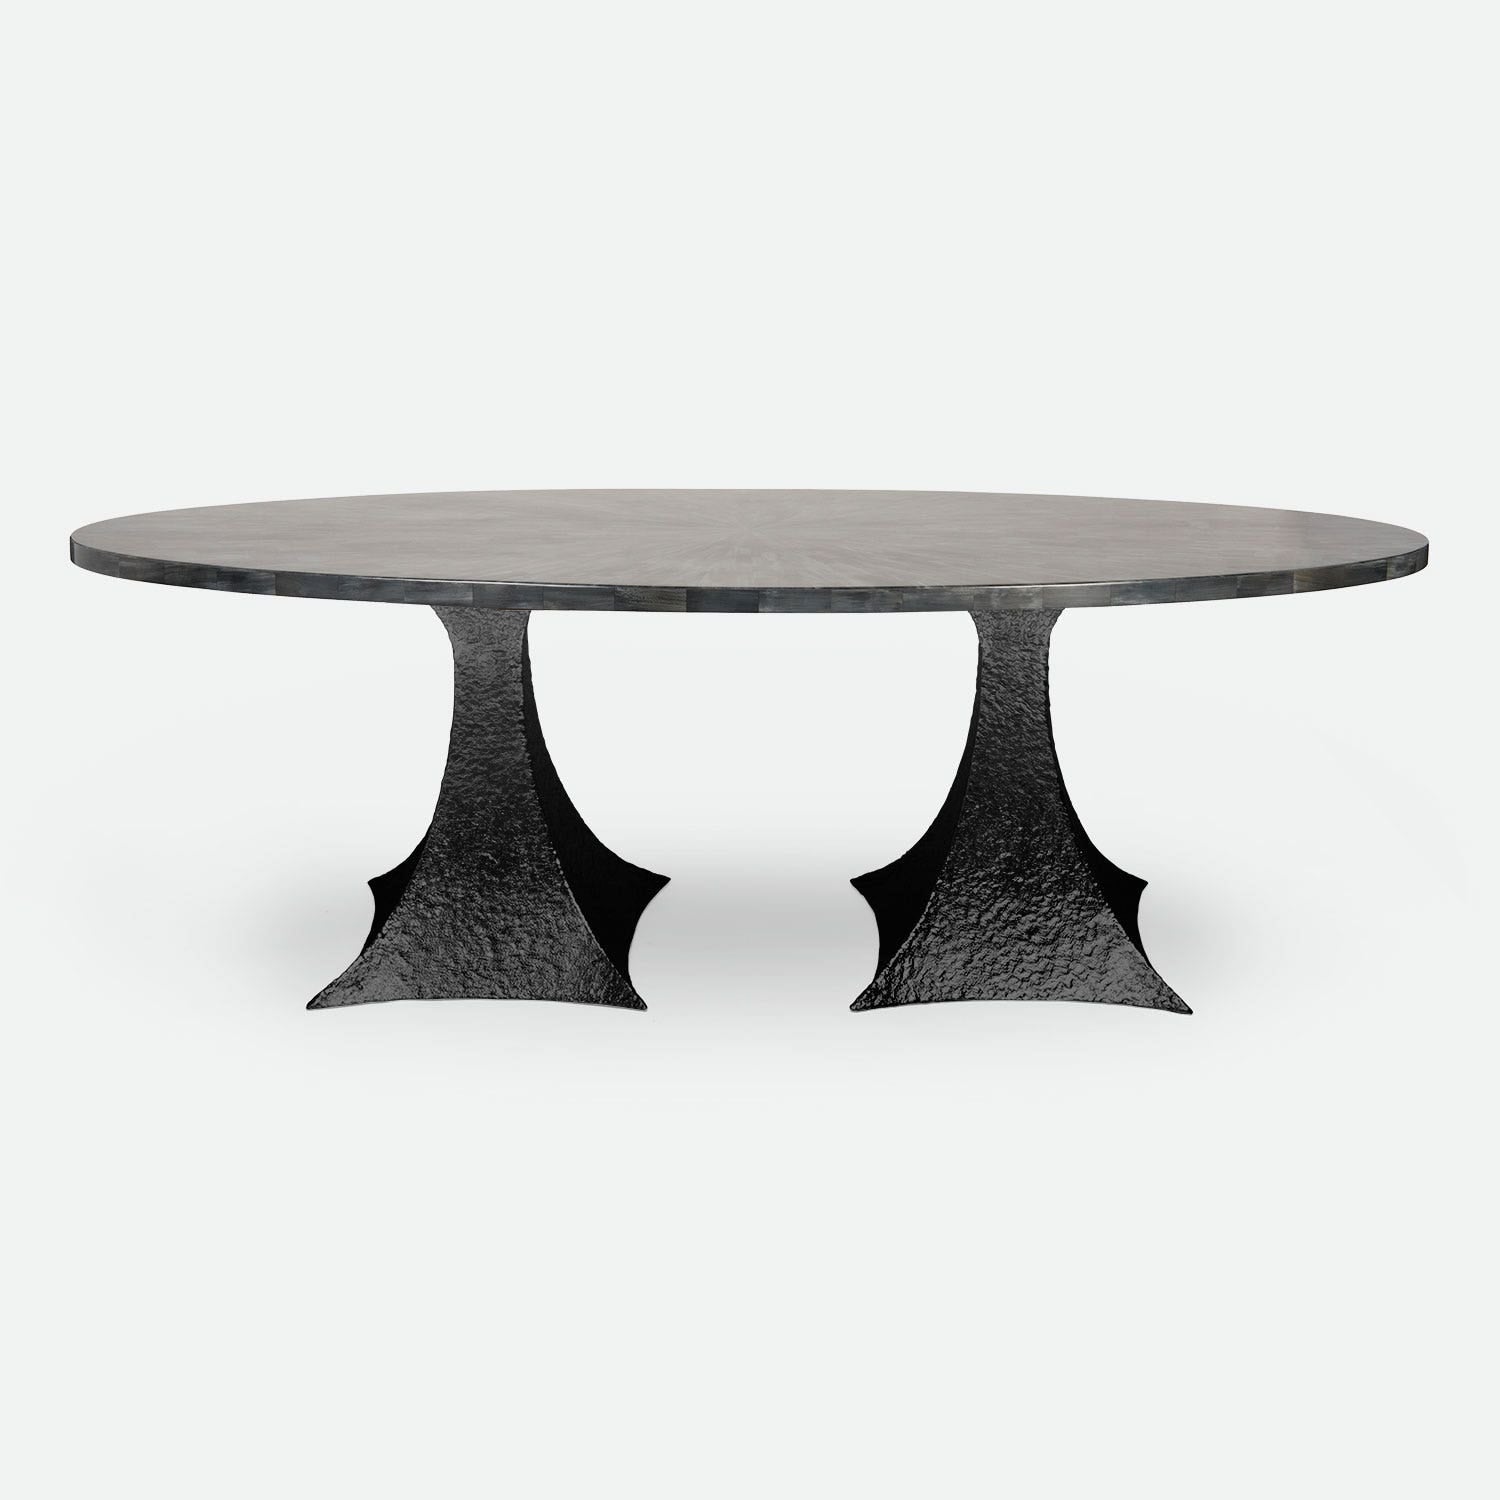 Made Goods Noor 84" x 42" x 30" Double Base Bumpy Black Iron Dinning Table With Oval Dark Faux Horn Table Top